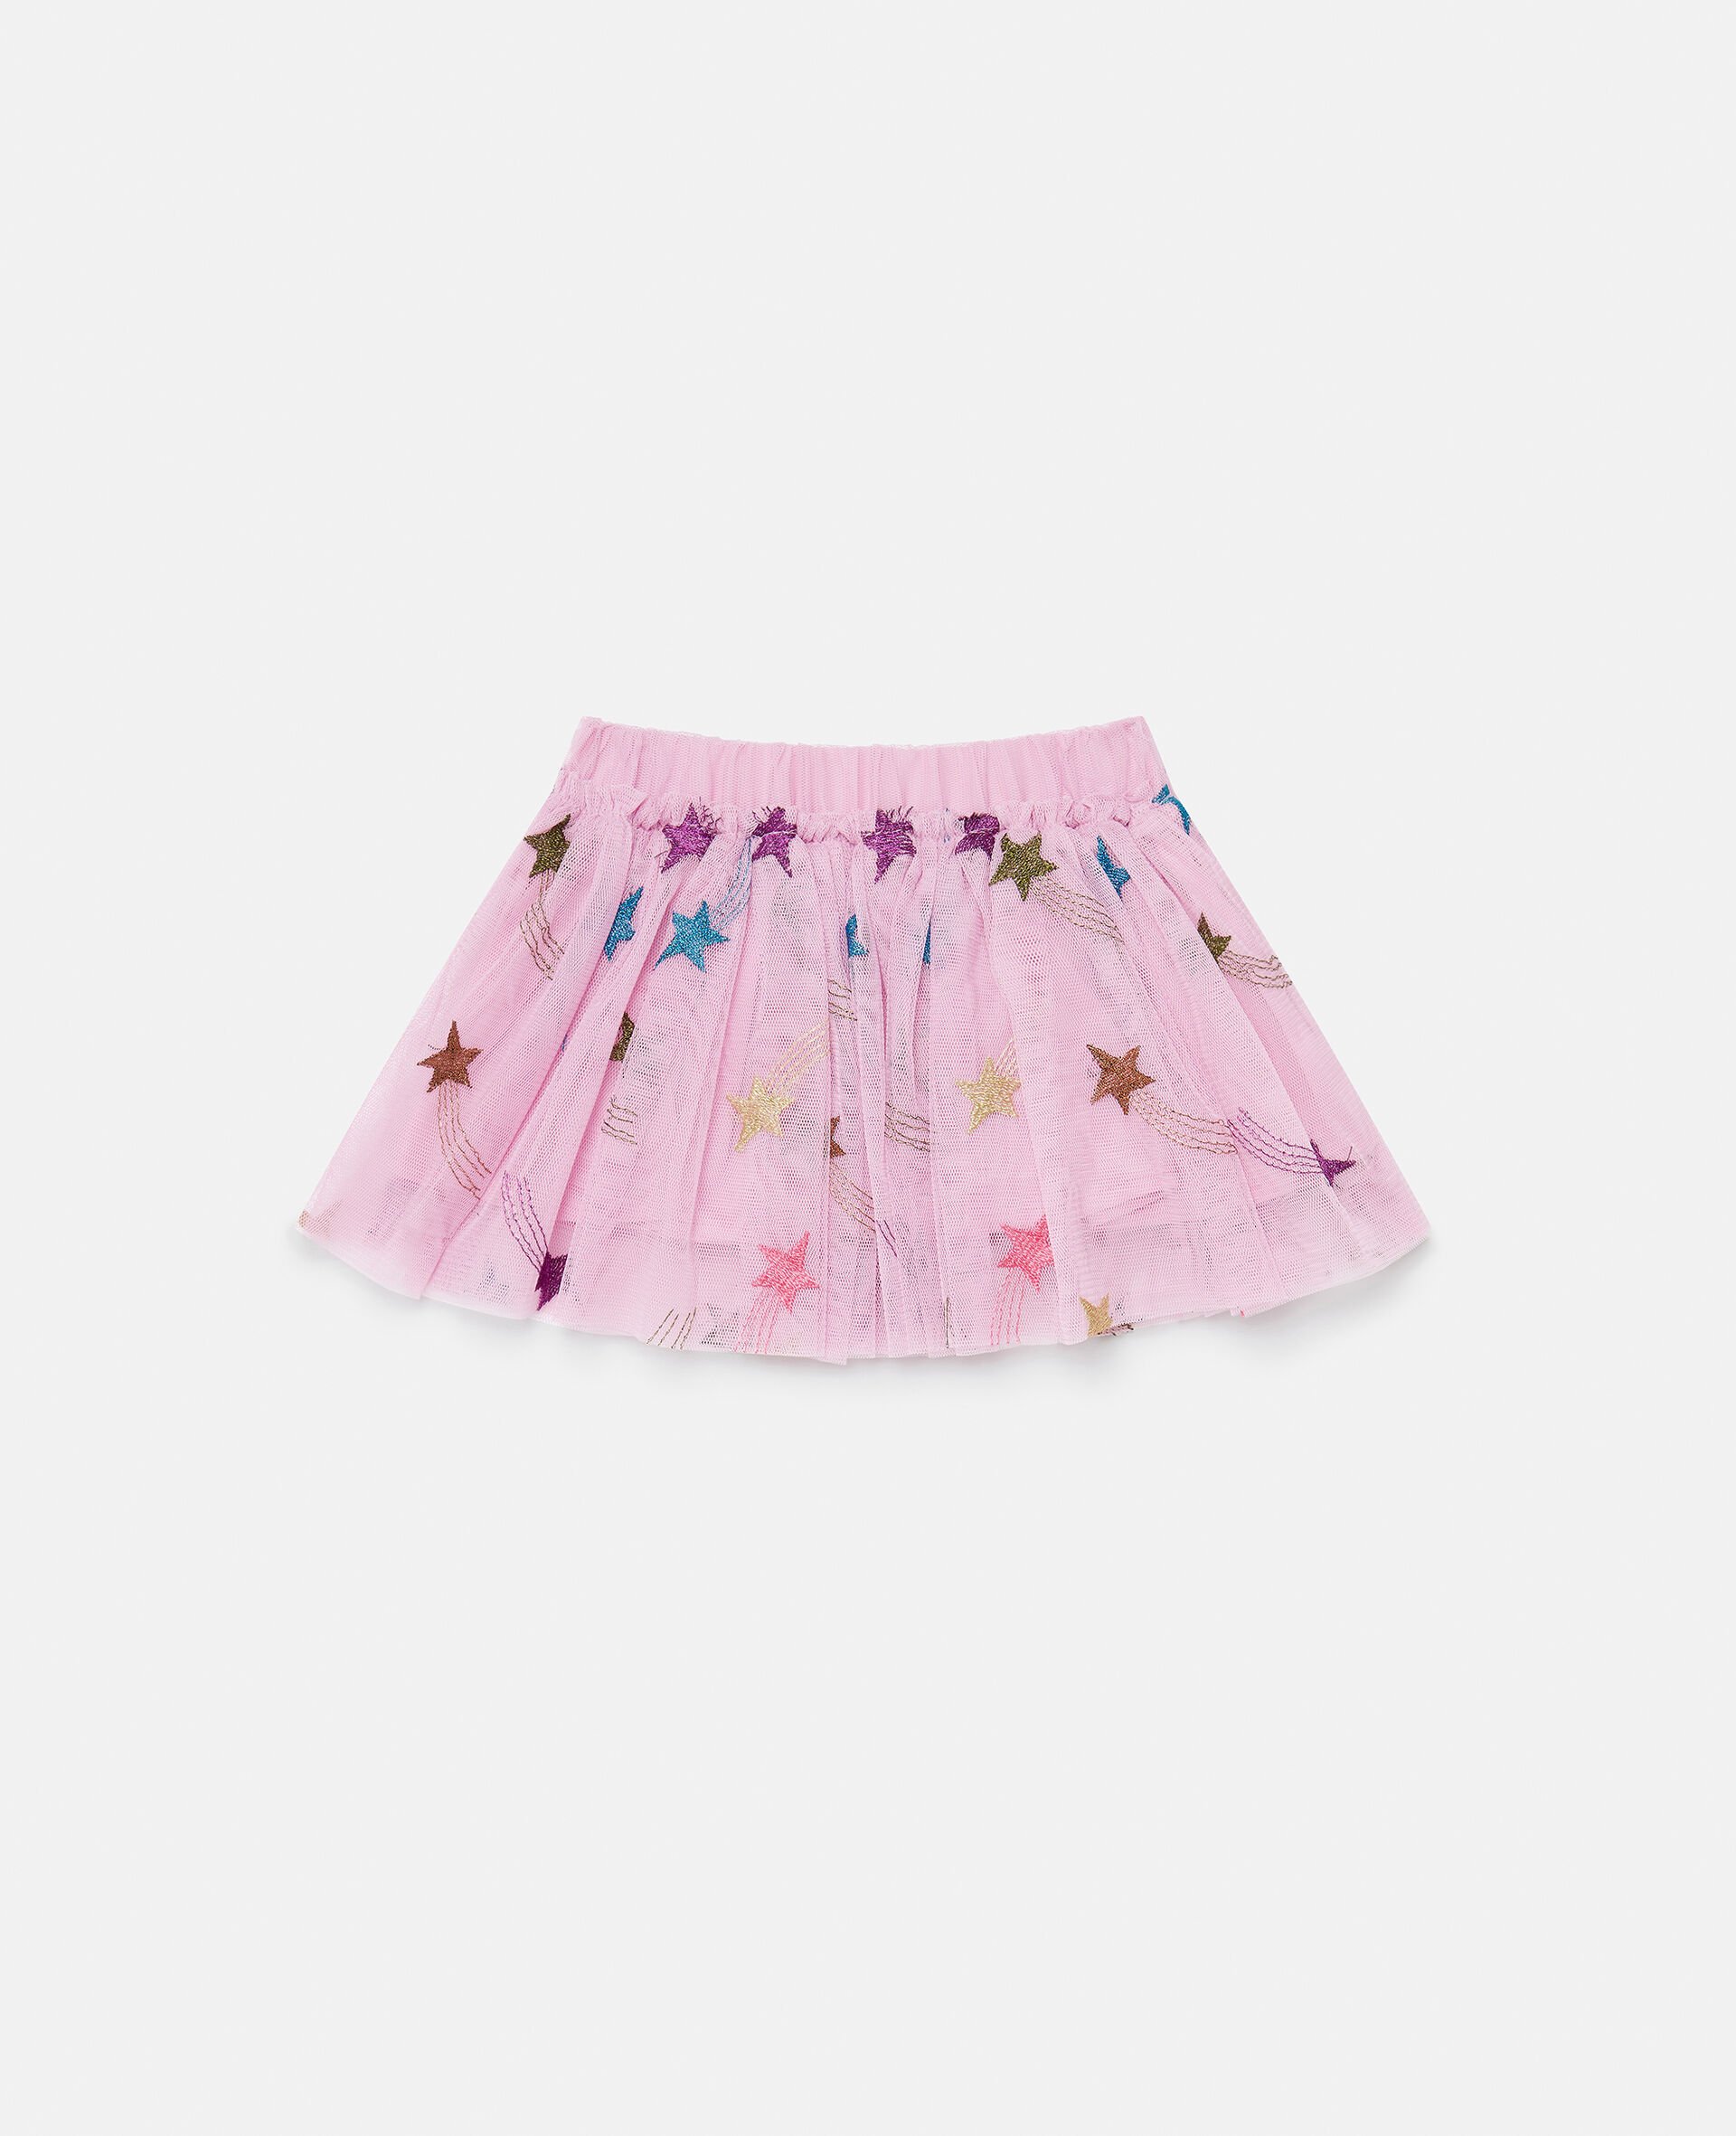 Shooting Stars Embroidered Skirt -Pink-large image number 0